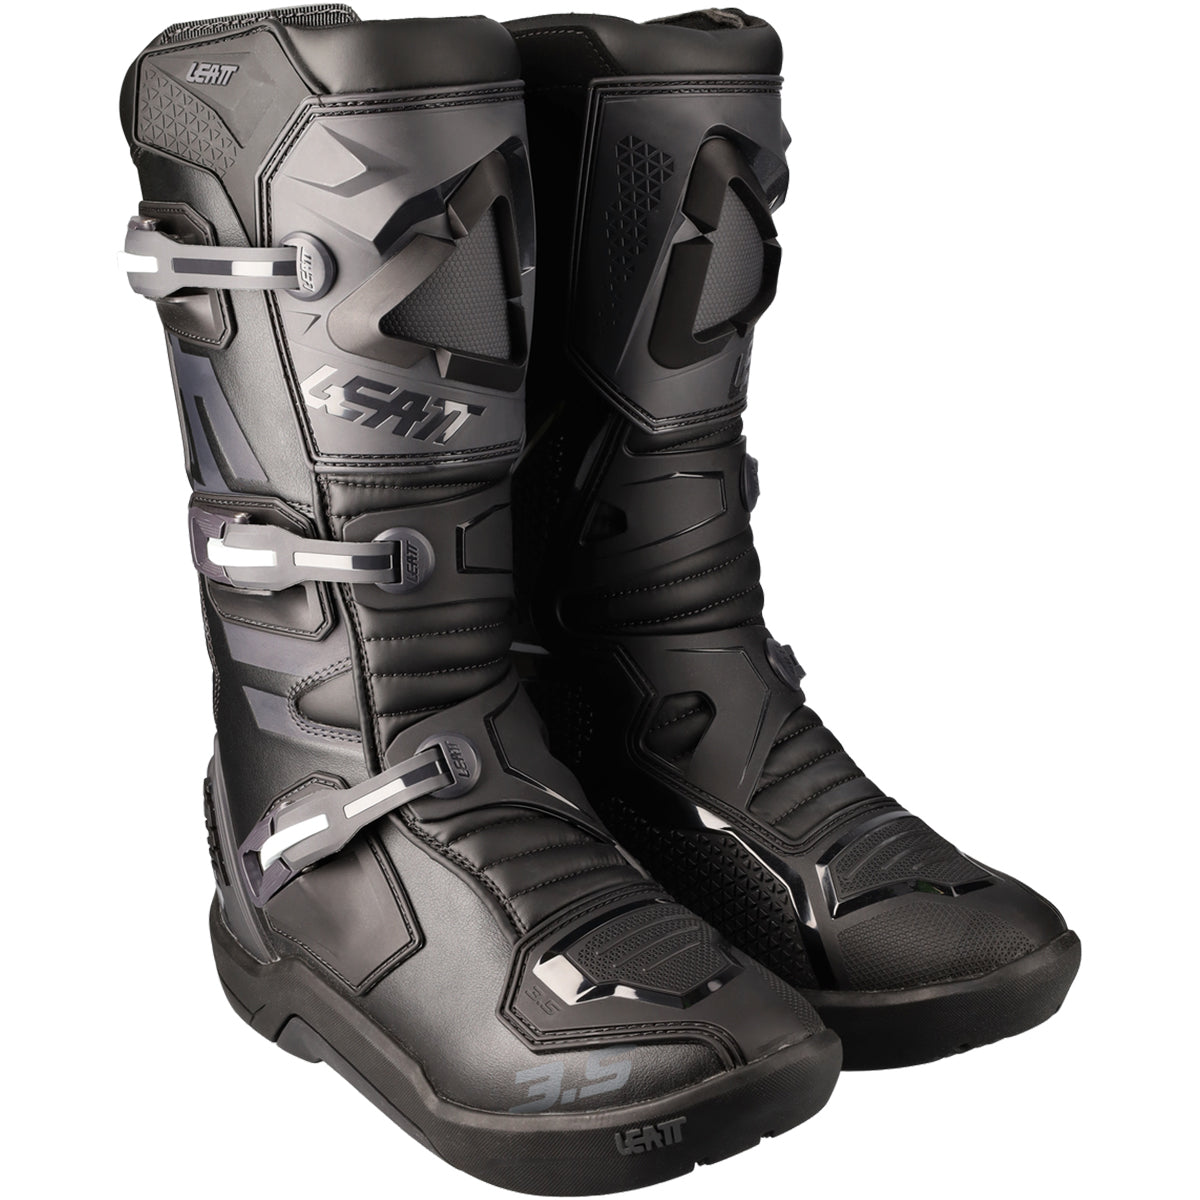 shabby Give Antagonisme Leatt 3.5 V22 Adult Off-Road Boots (Refurbished, Without Tags) –  Haustrom.com | Shop Action Sports